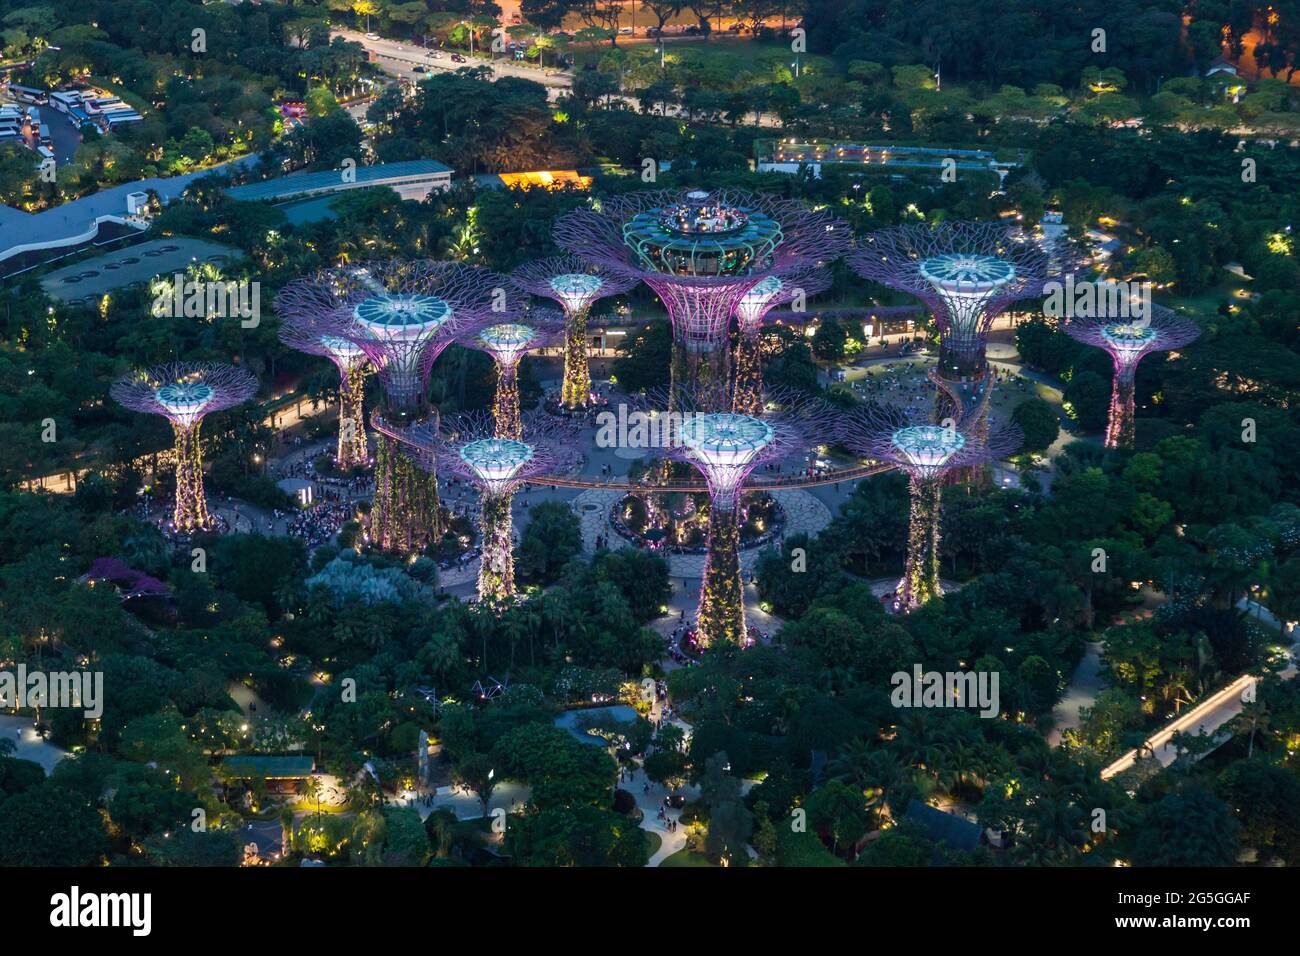 Aerial view of Singapore's Gardens by the Bay Supertree Grove at dusk Stock Photo